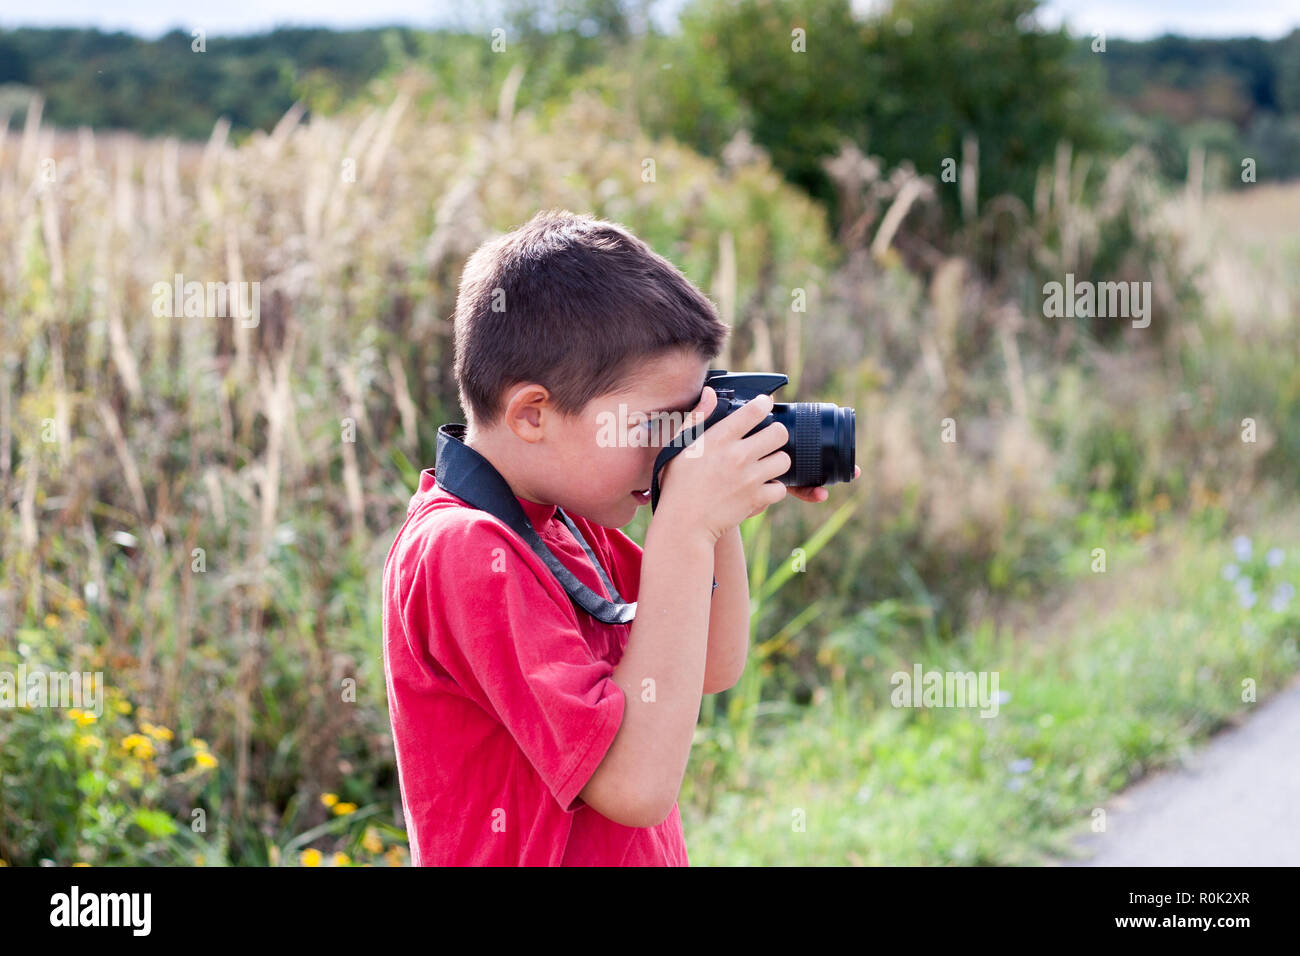 A portrait of a young boy, holding a modern digital camera Stock Photo